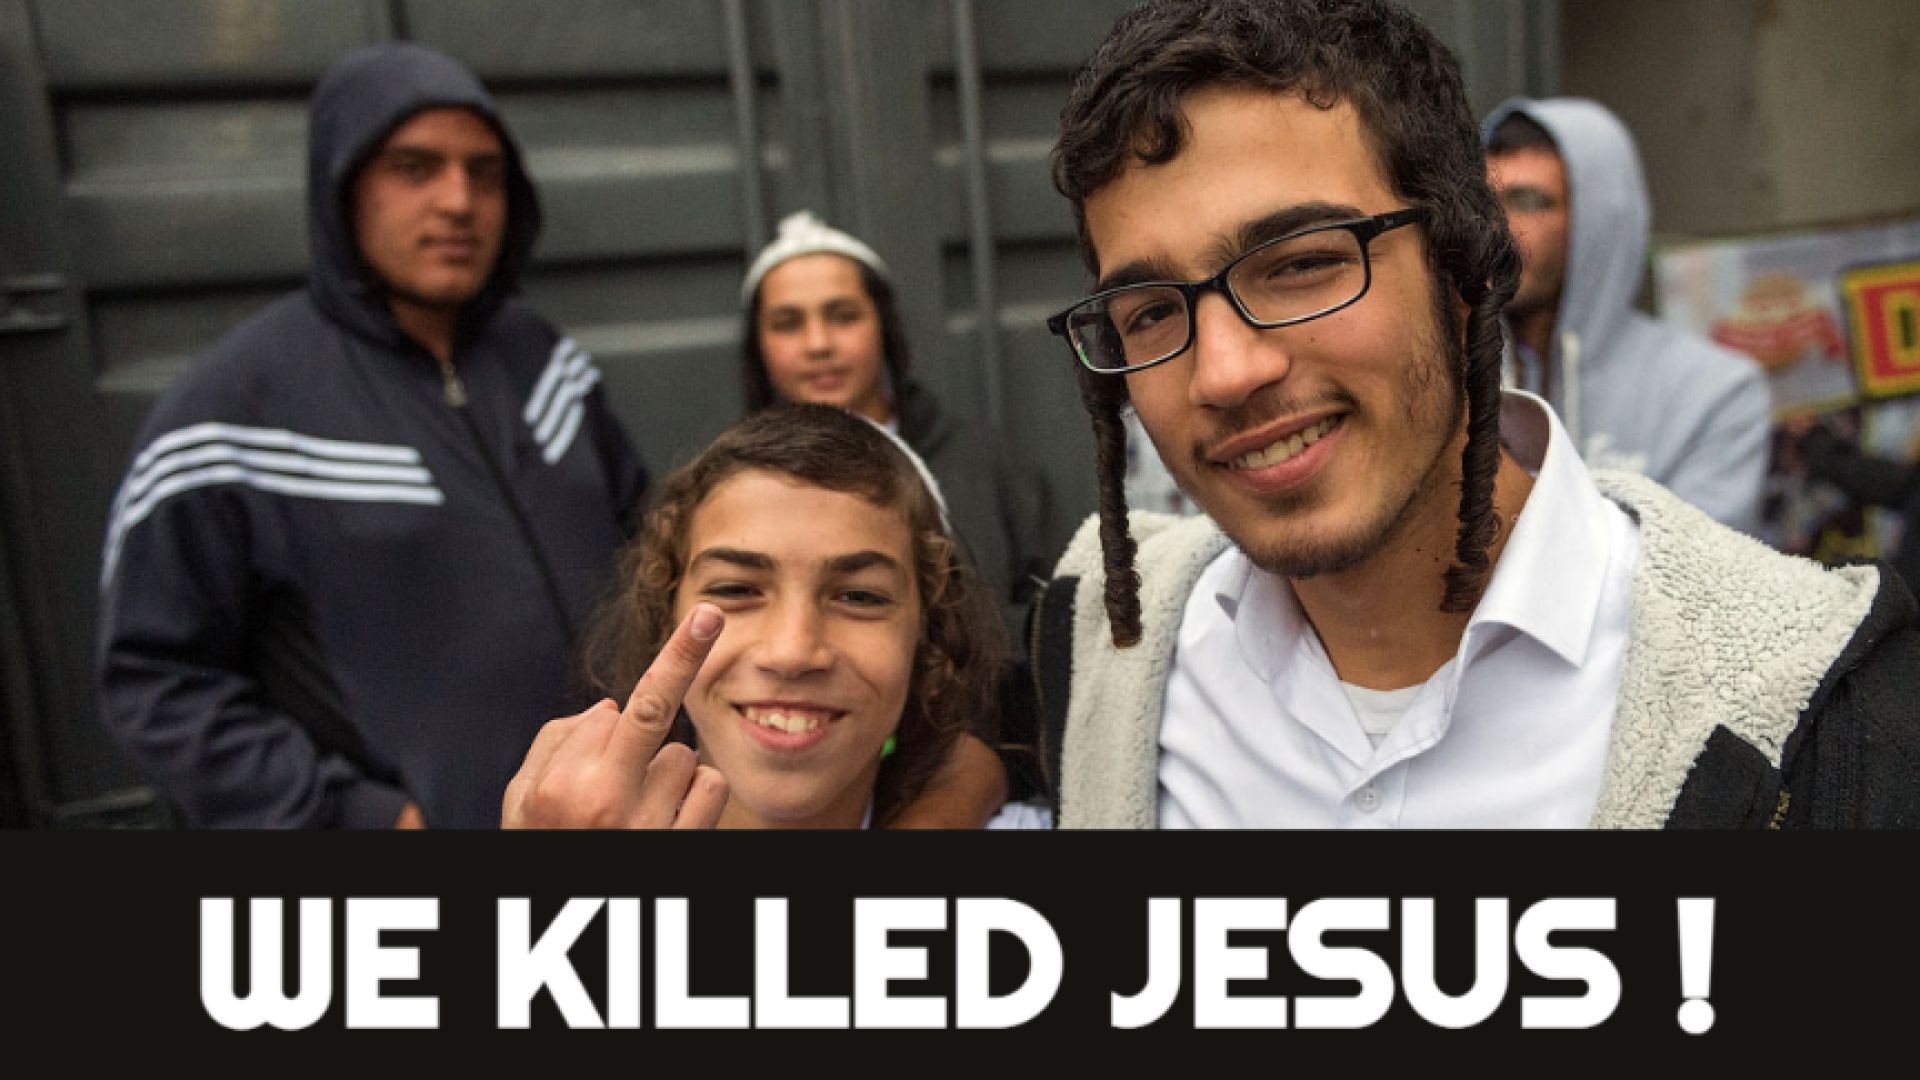 🚨PARASITE ISRAELI YOUTH "WE KILLED JESUS AND WE ARE PROUD OF IT !"